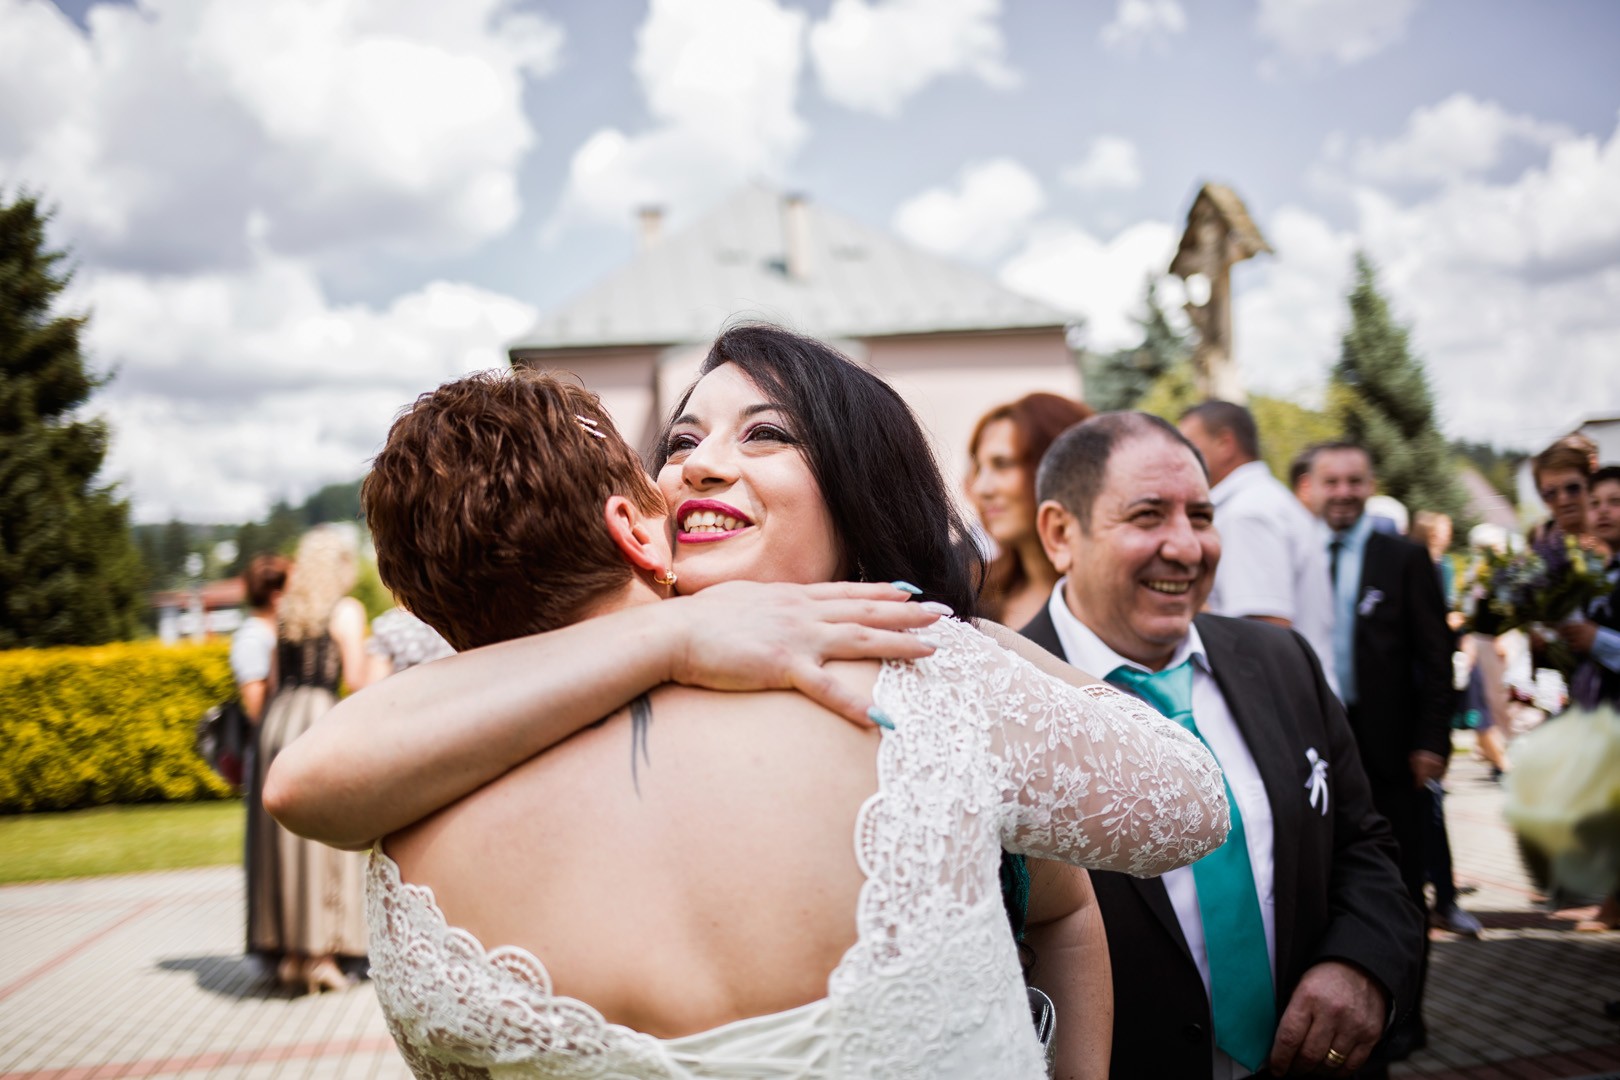 Wedding photos from the Slovak-Italian wedding of Mirka and Baldy in the beautiful surroundings of the Gbeľany Manor House - 0139.jpg